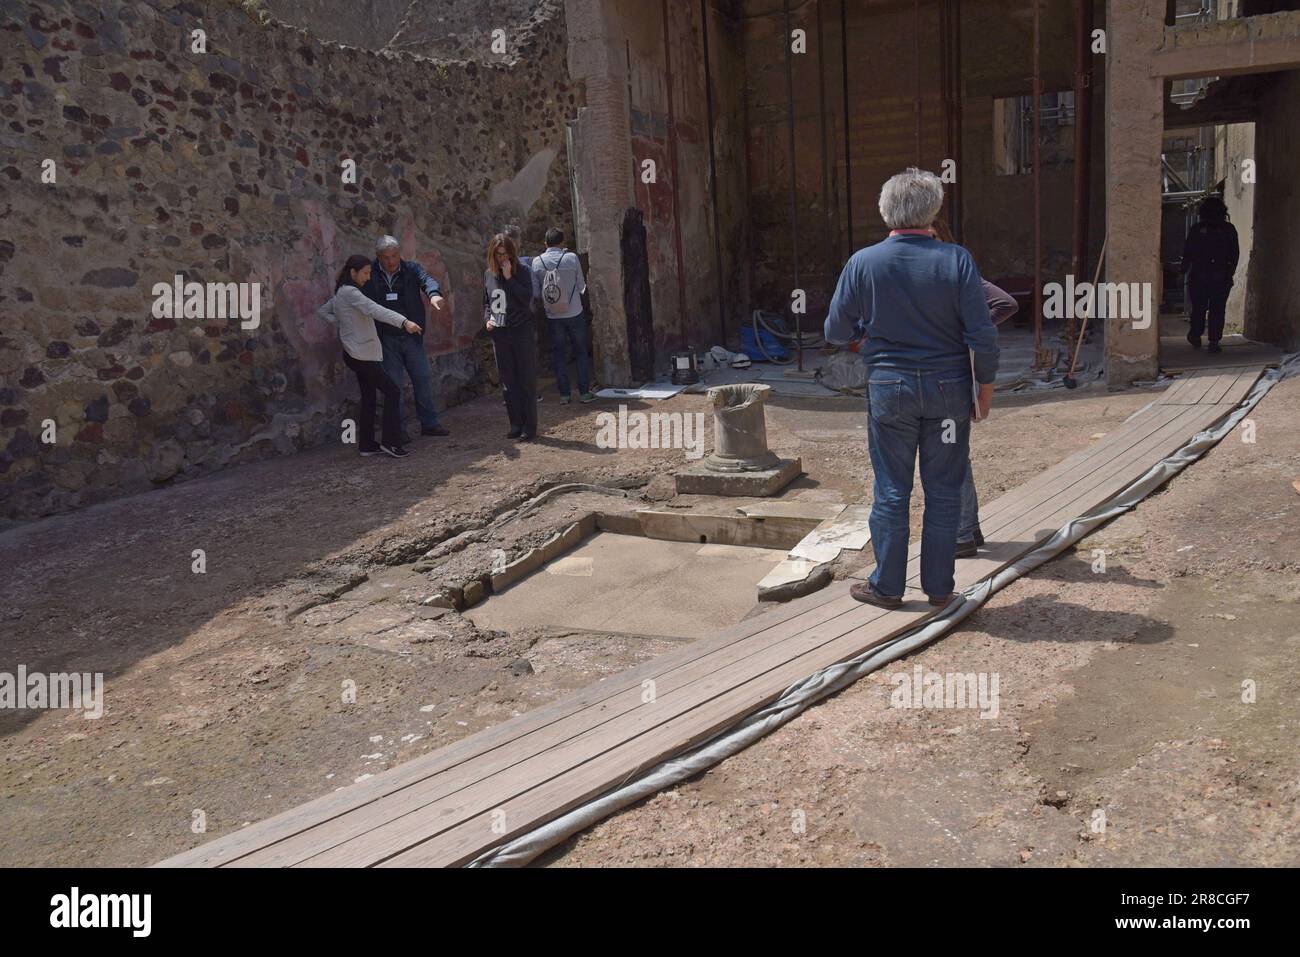 Archeologists and historians working in the preserved Roman town of Herculaneum, buried in the Vesuvius eruption of AD79, Ercolano, Italy Stock Photo